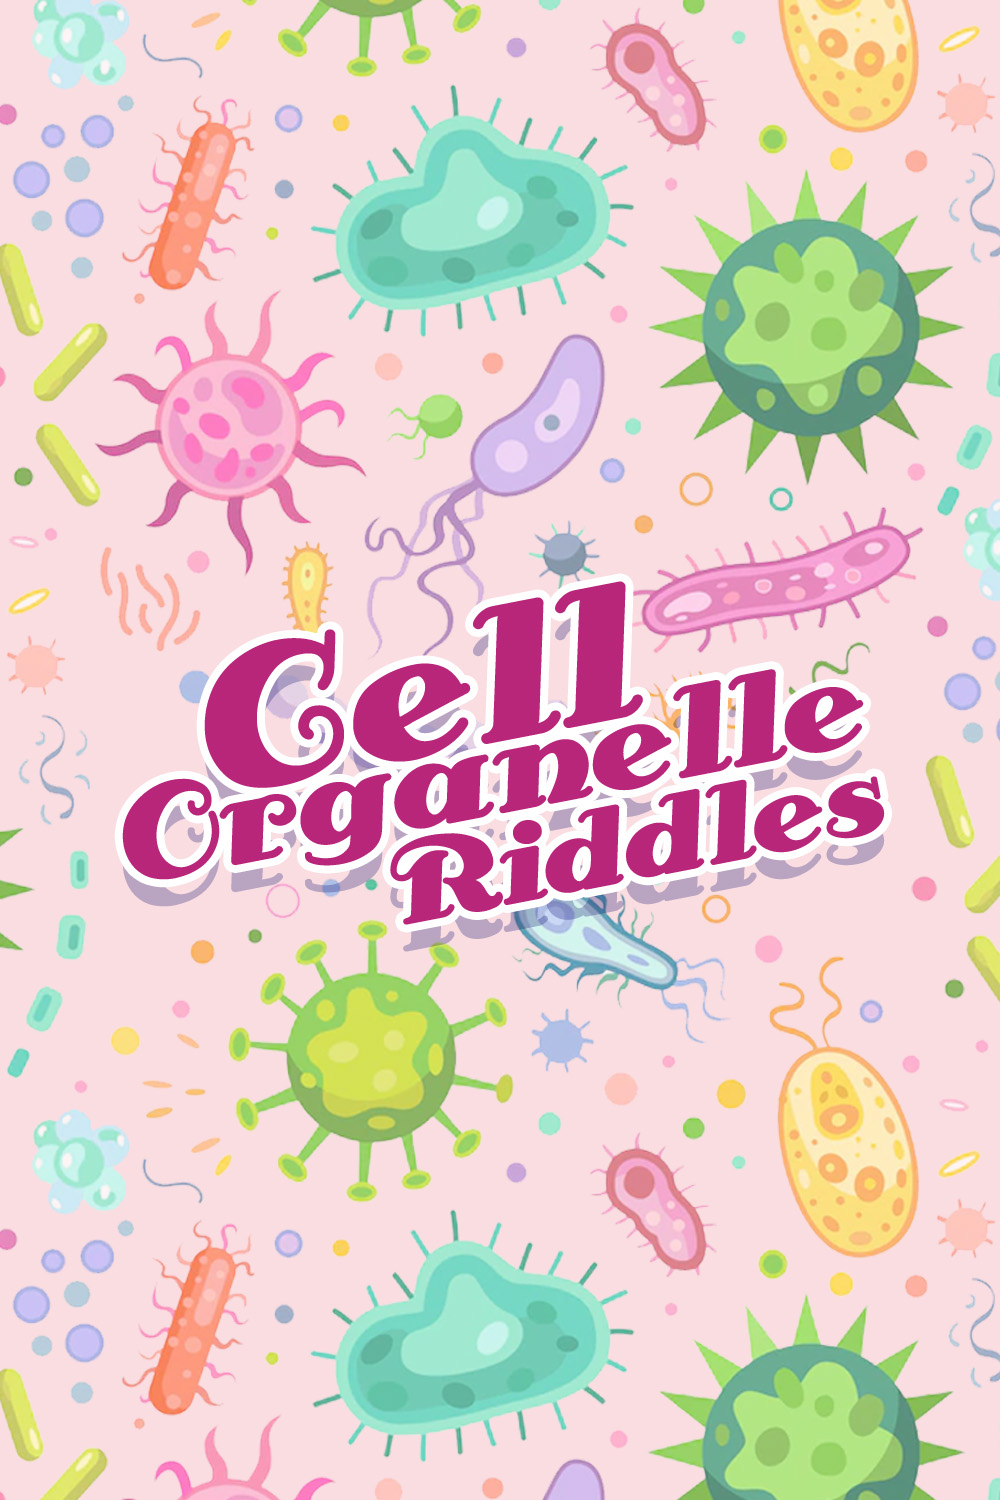 14 Images of Cell Organelle Riddles Worksheet Answers